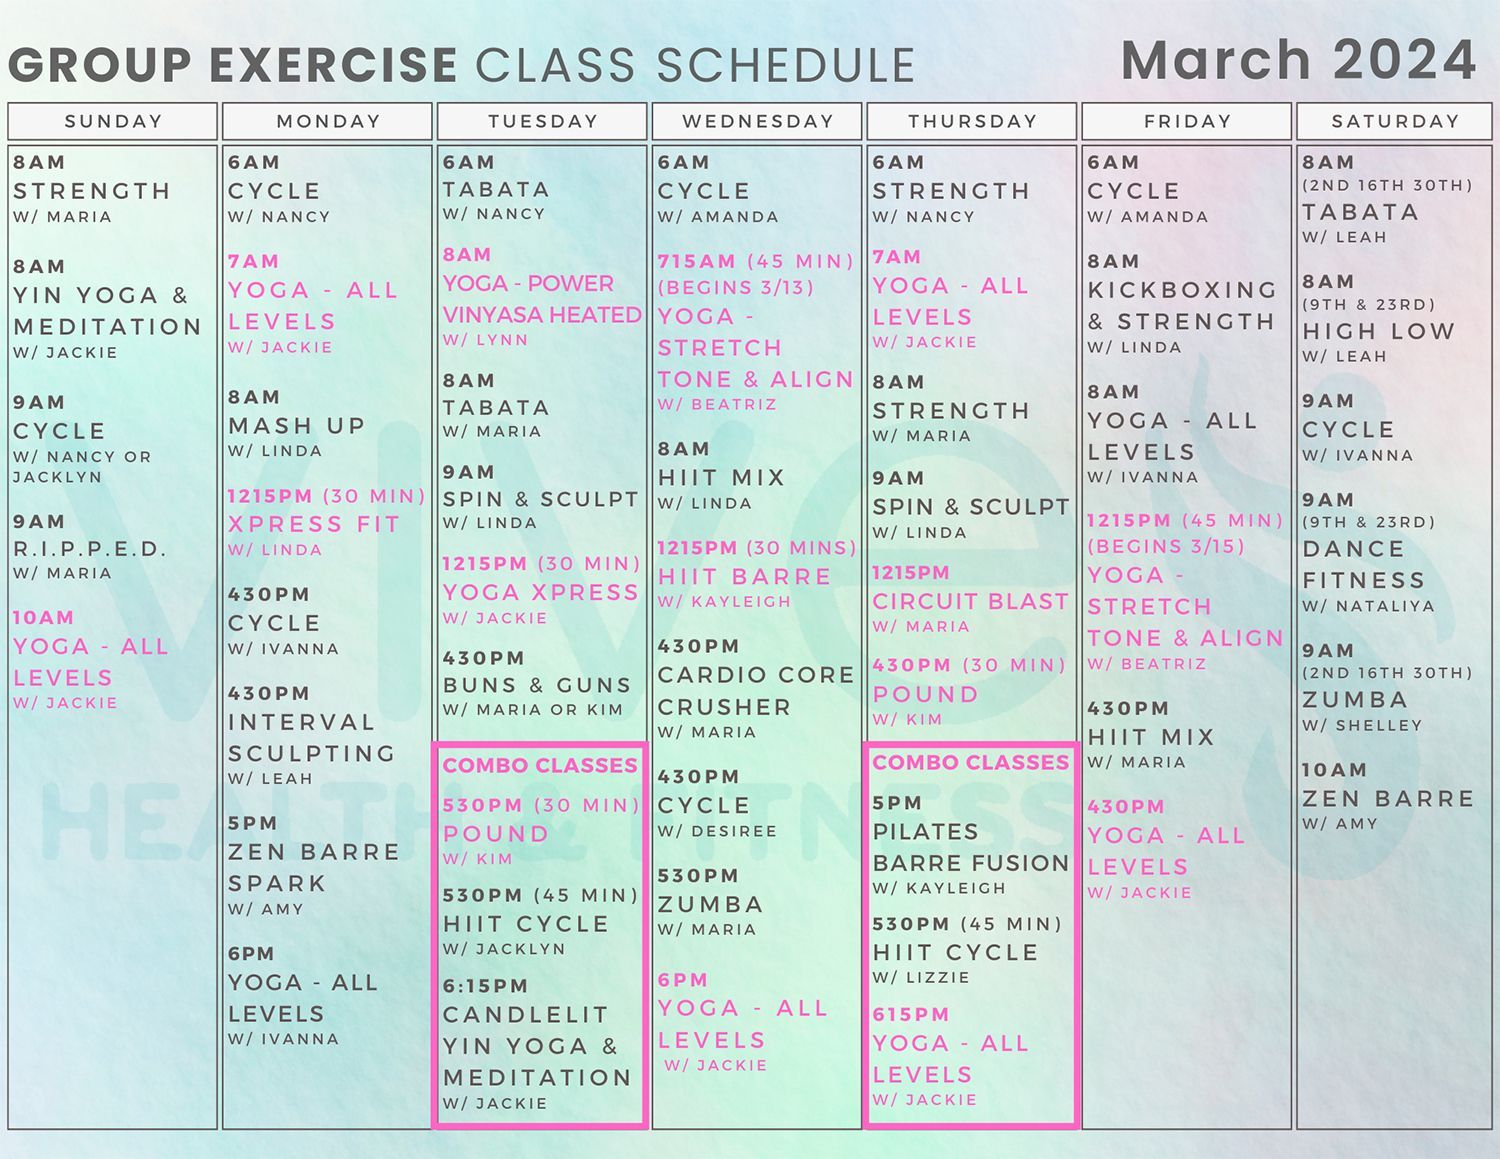 A group exercise class schedule for march 2024